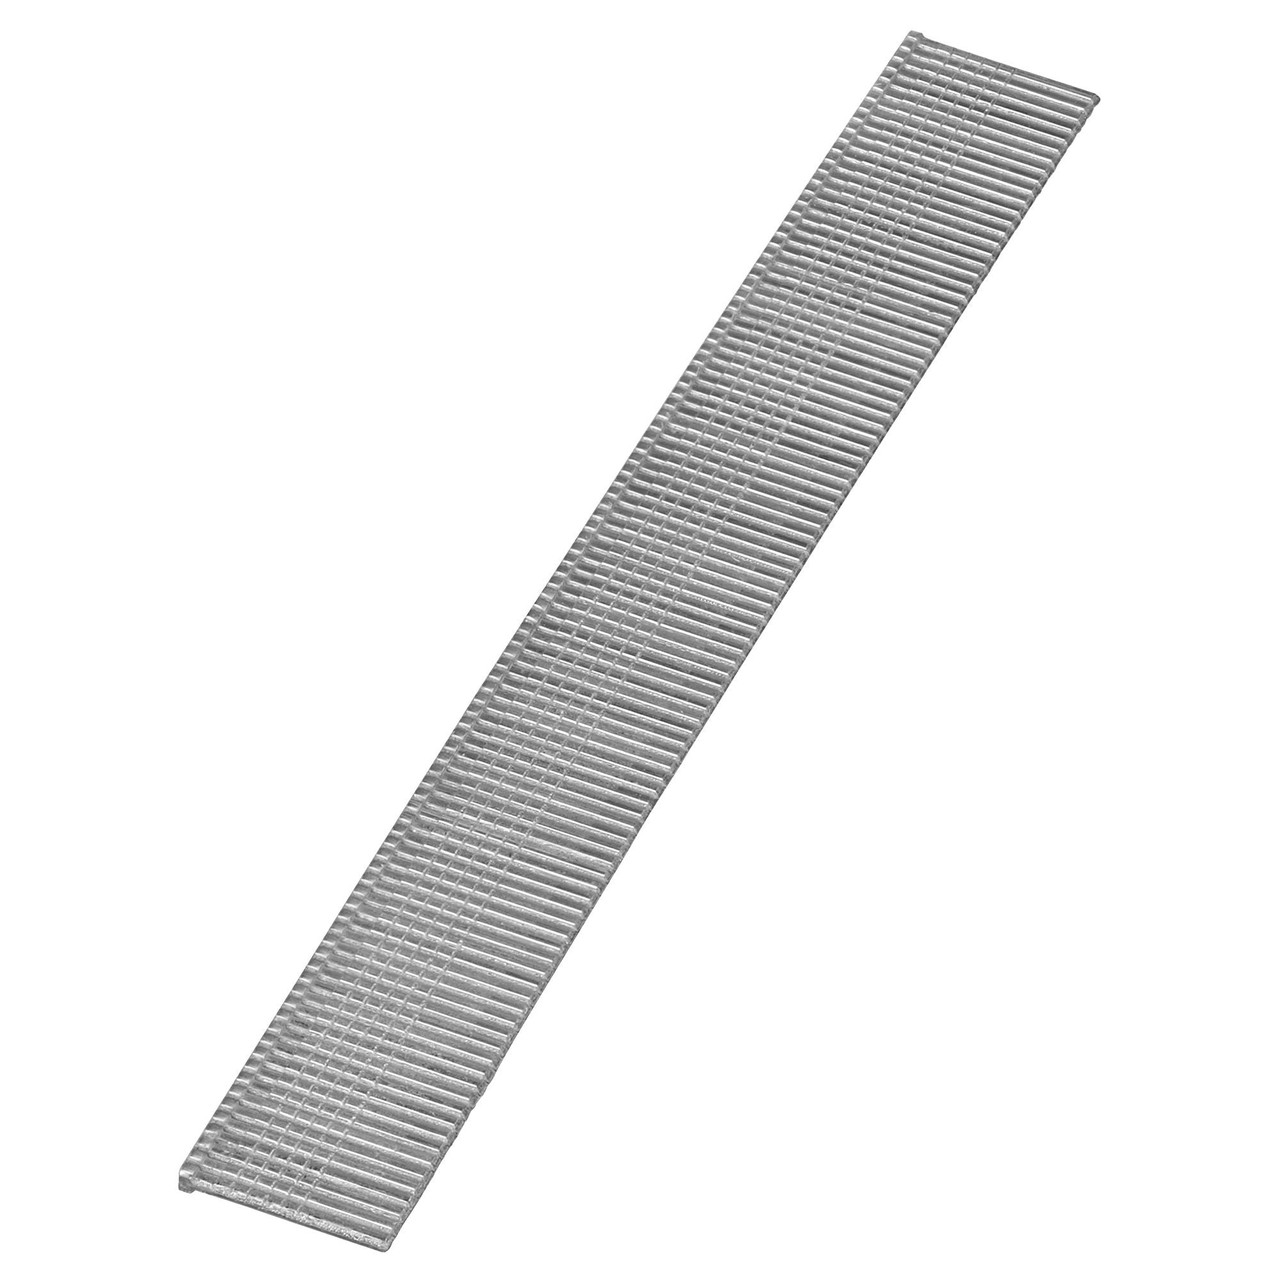 BOSTITCH 5/8" X 18 Gauge Brad Nail Galvanized Finish With Chisel Point, 3000 Count(10 Pcs)